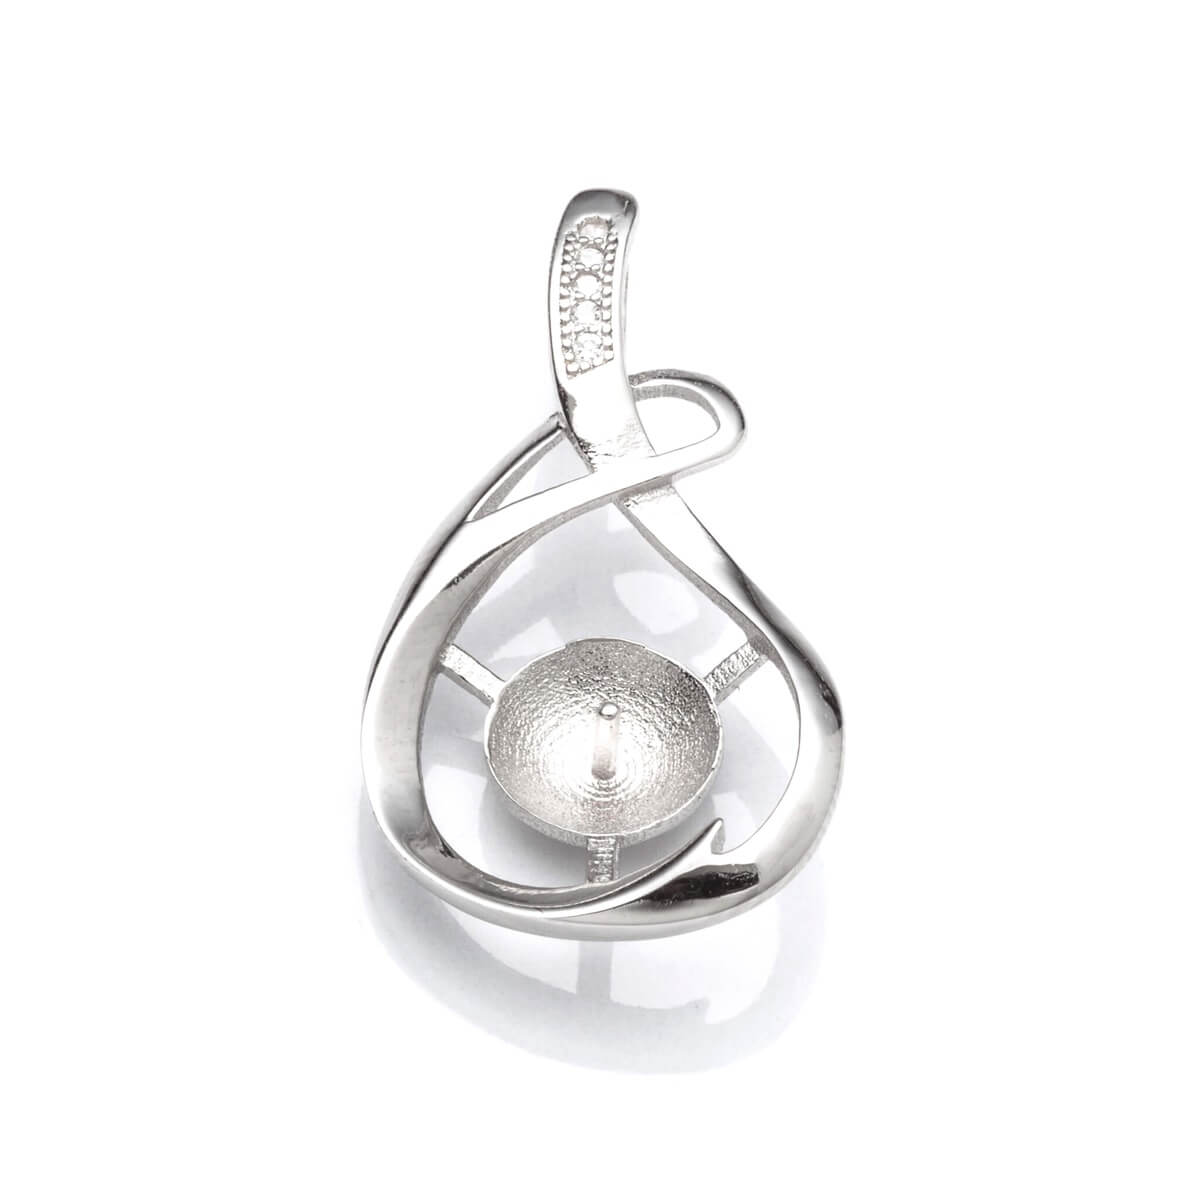 Pear Pendant with Cubic Zirconia Inlays and Cup and Peg Mounting in Sterling Silver 6mm